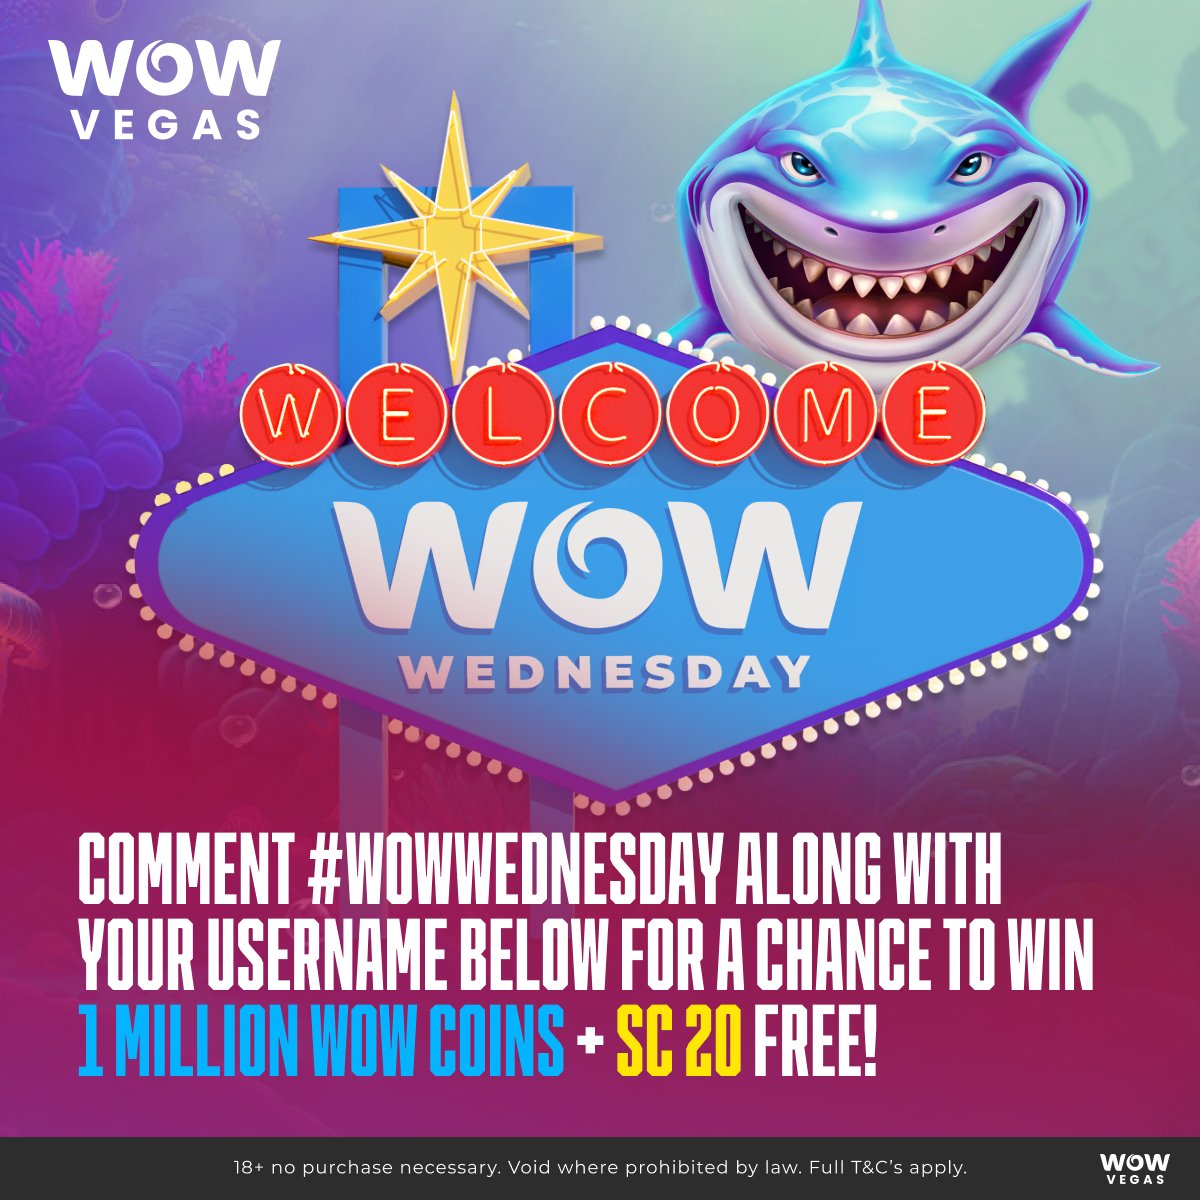 It's WOW Wednesday! 😱🎉 Ready to win big? Simply comment with #WowWednesday and your username below. We're selecting 20 lucky winners from across our social media platforms, each receiving 1,000,000 WOW Coins and SC 20! Winners will be announced tomorrow! 🏆✨